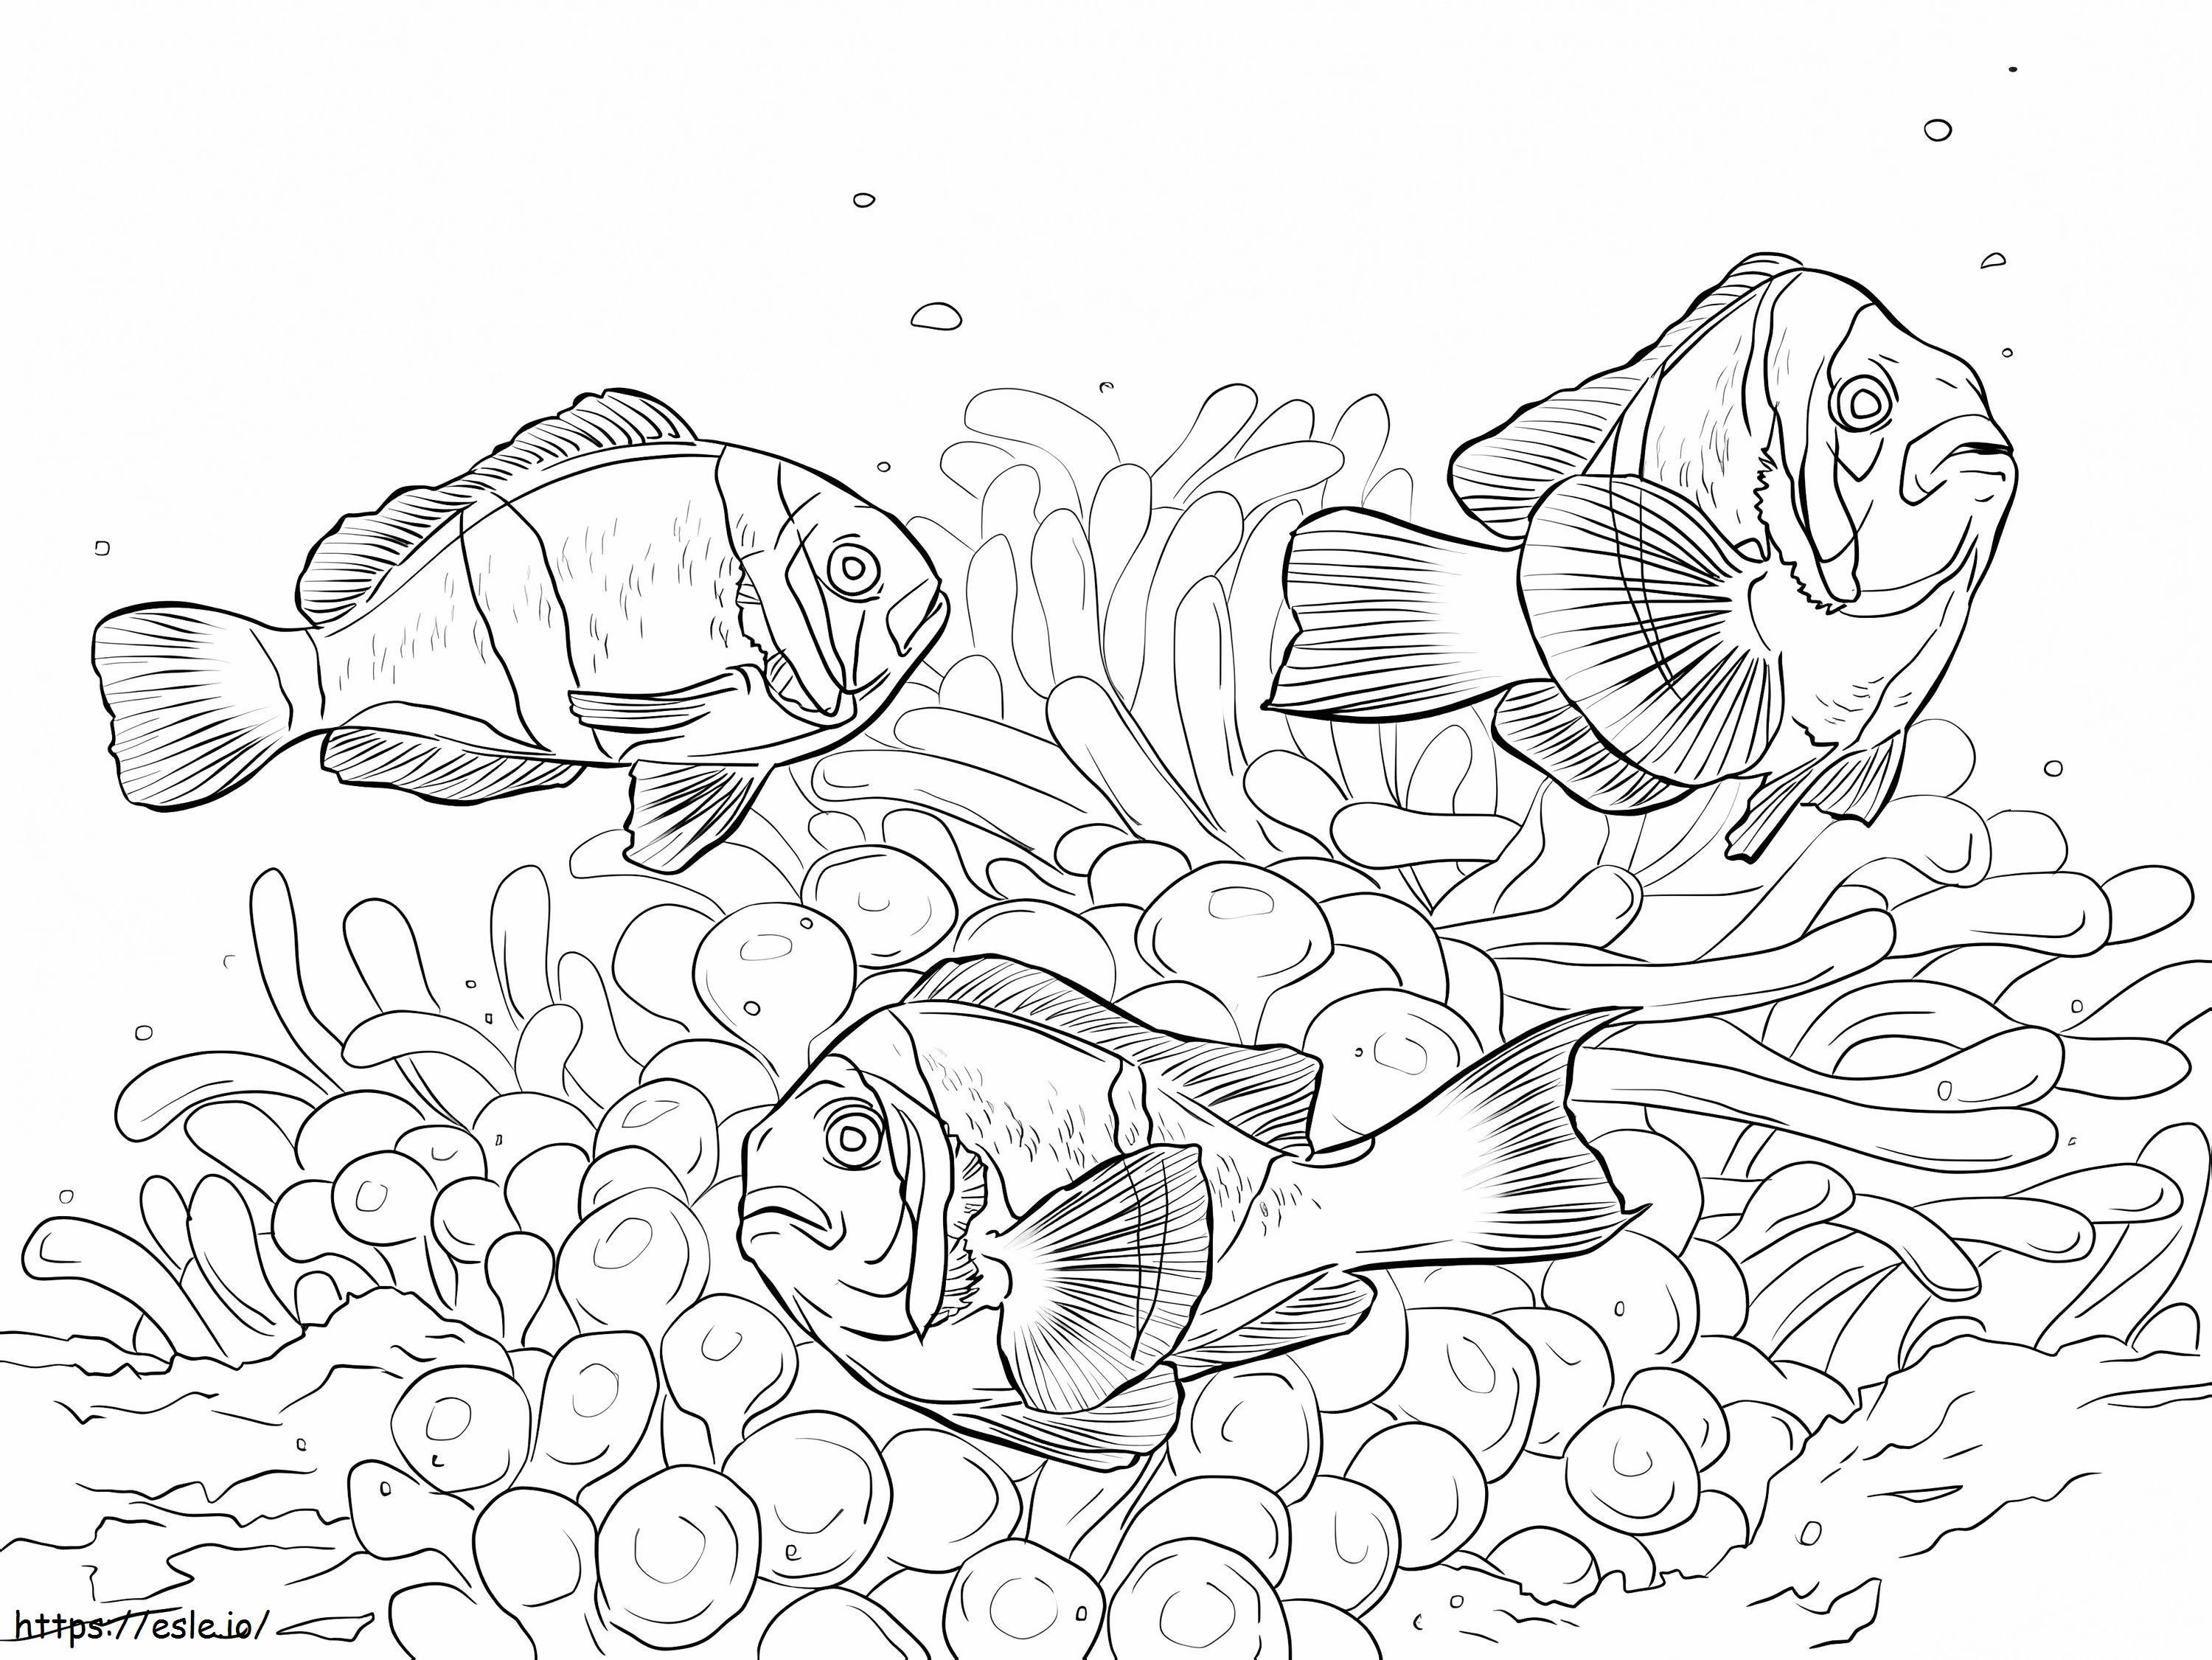 Allards Clownfishes coloring page